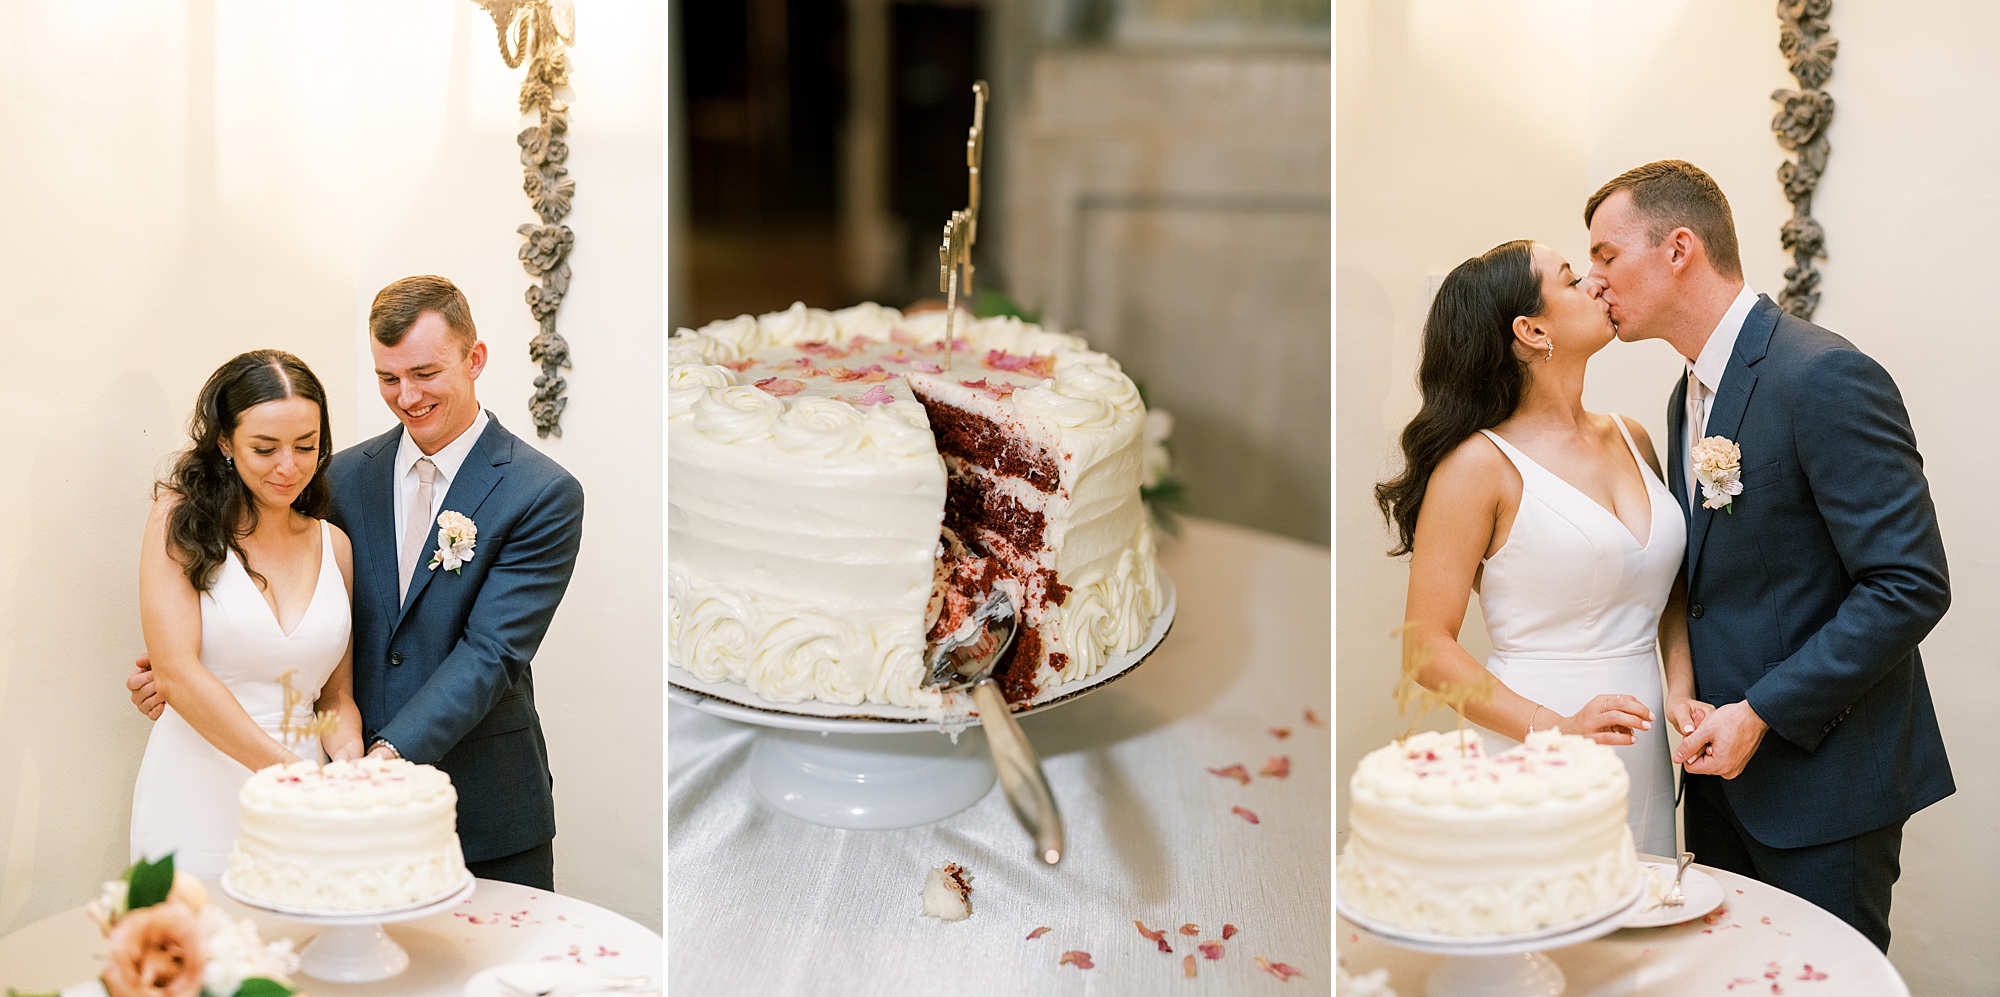 newlyweds cut their wedding cake and share a kiss 